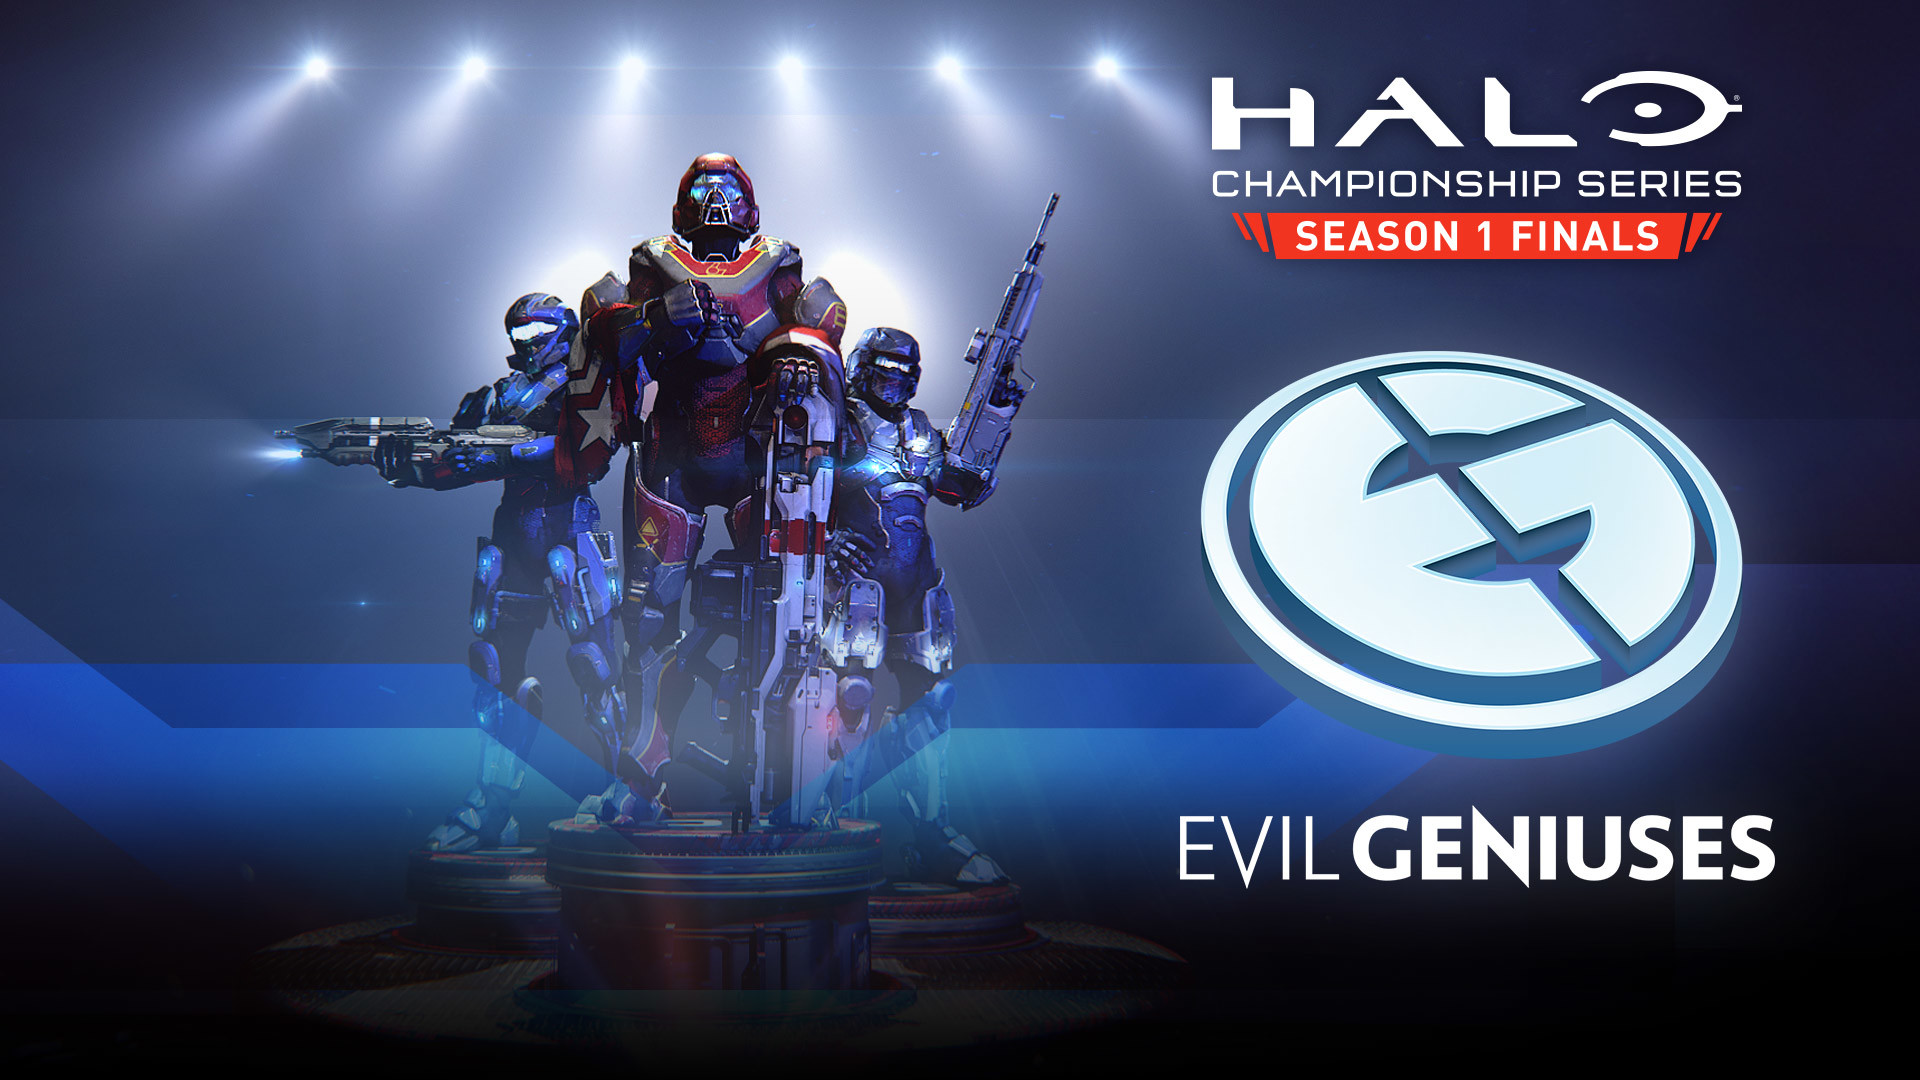 1920x1080 Season 1 Finals - Wallpapers & Social kit | Halo Championship Series | Halo  - Official Site